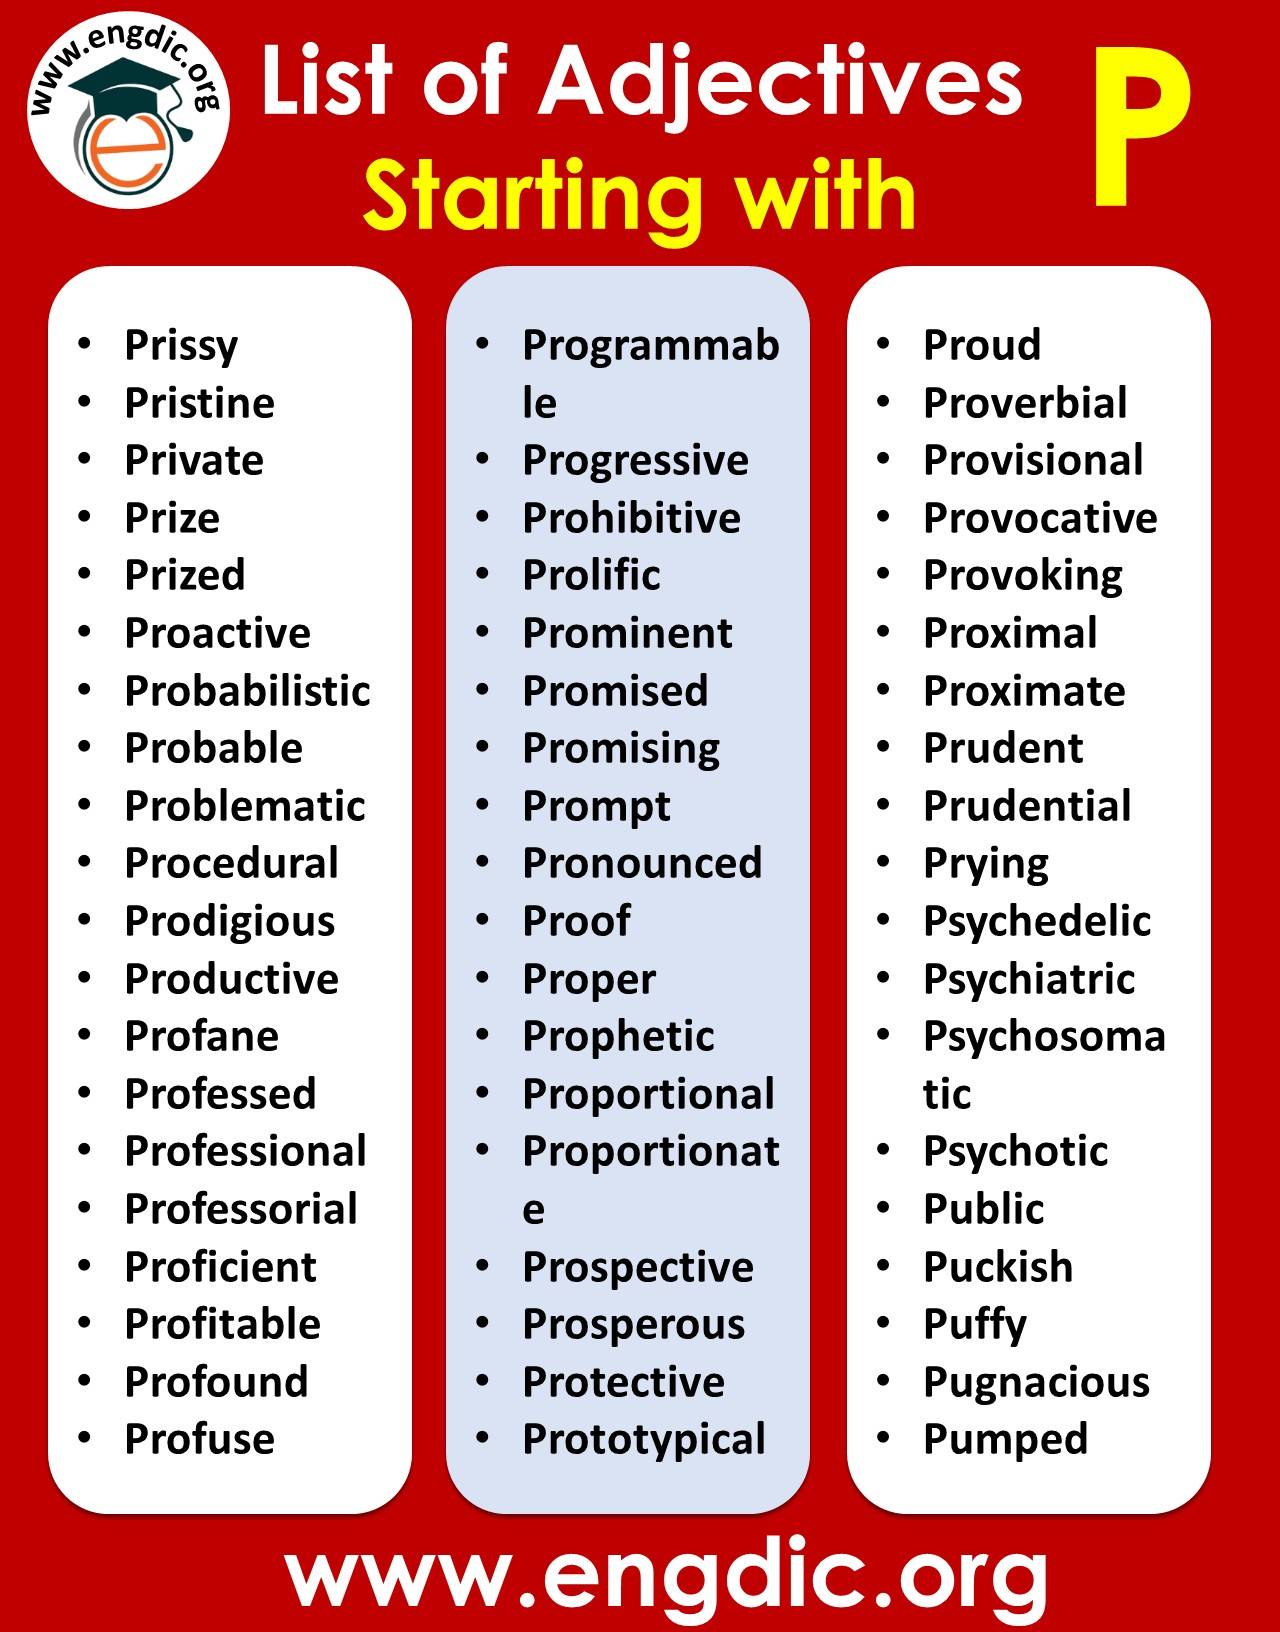 adjectives that start with p to describe a person positively